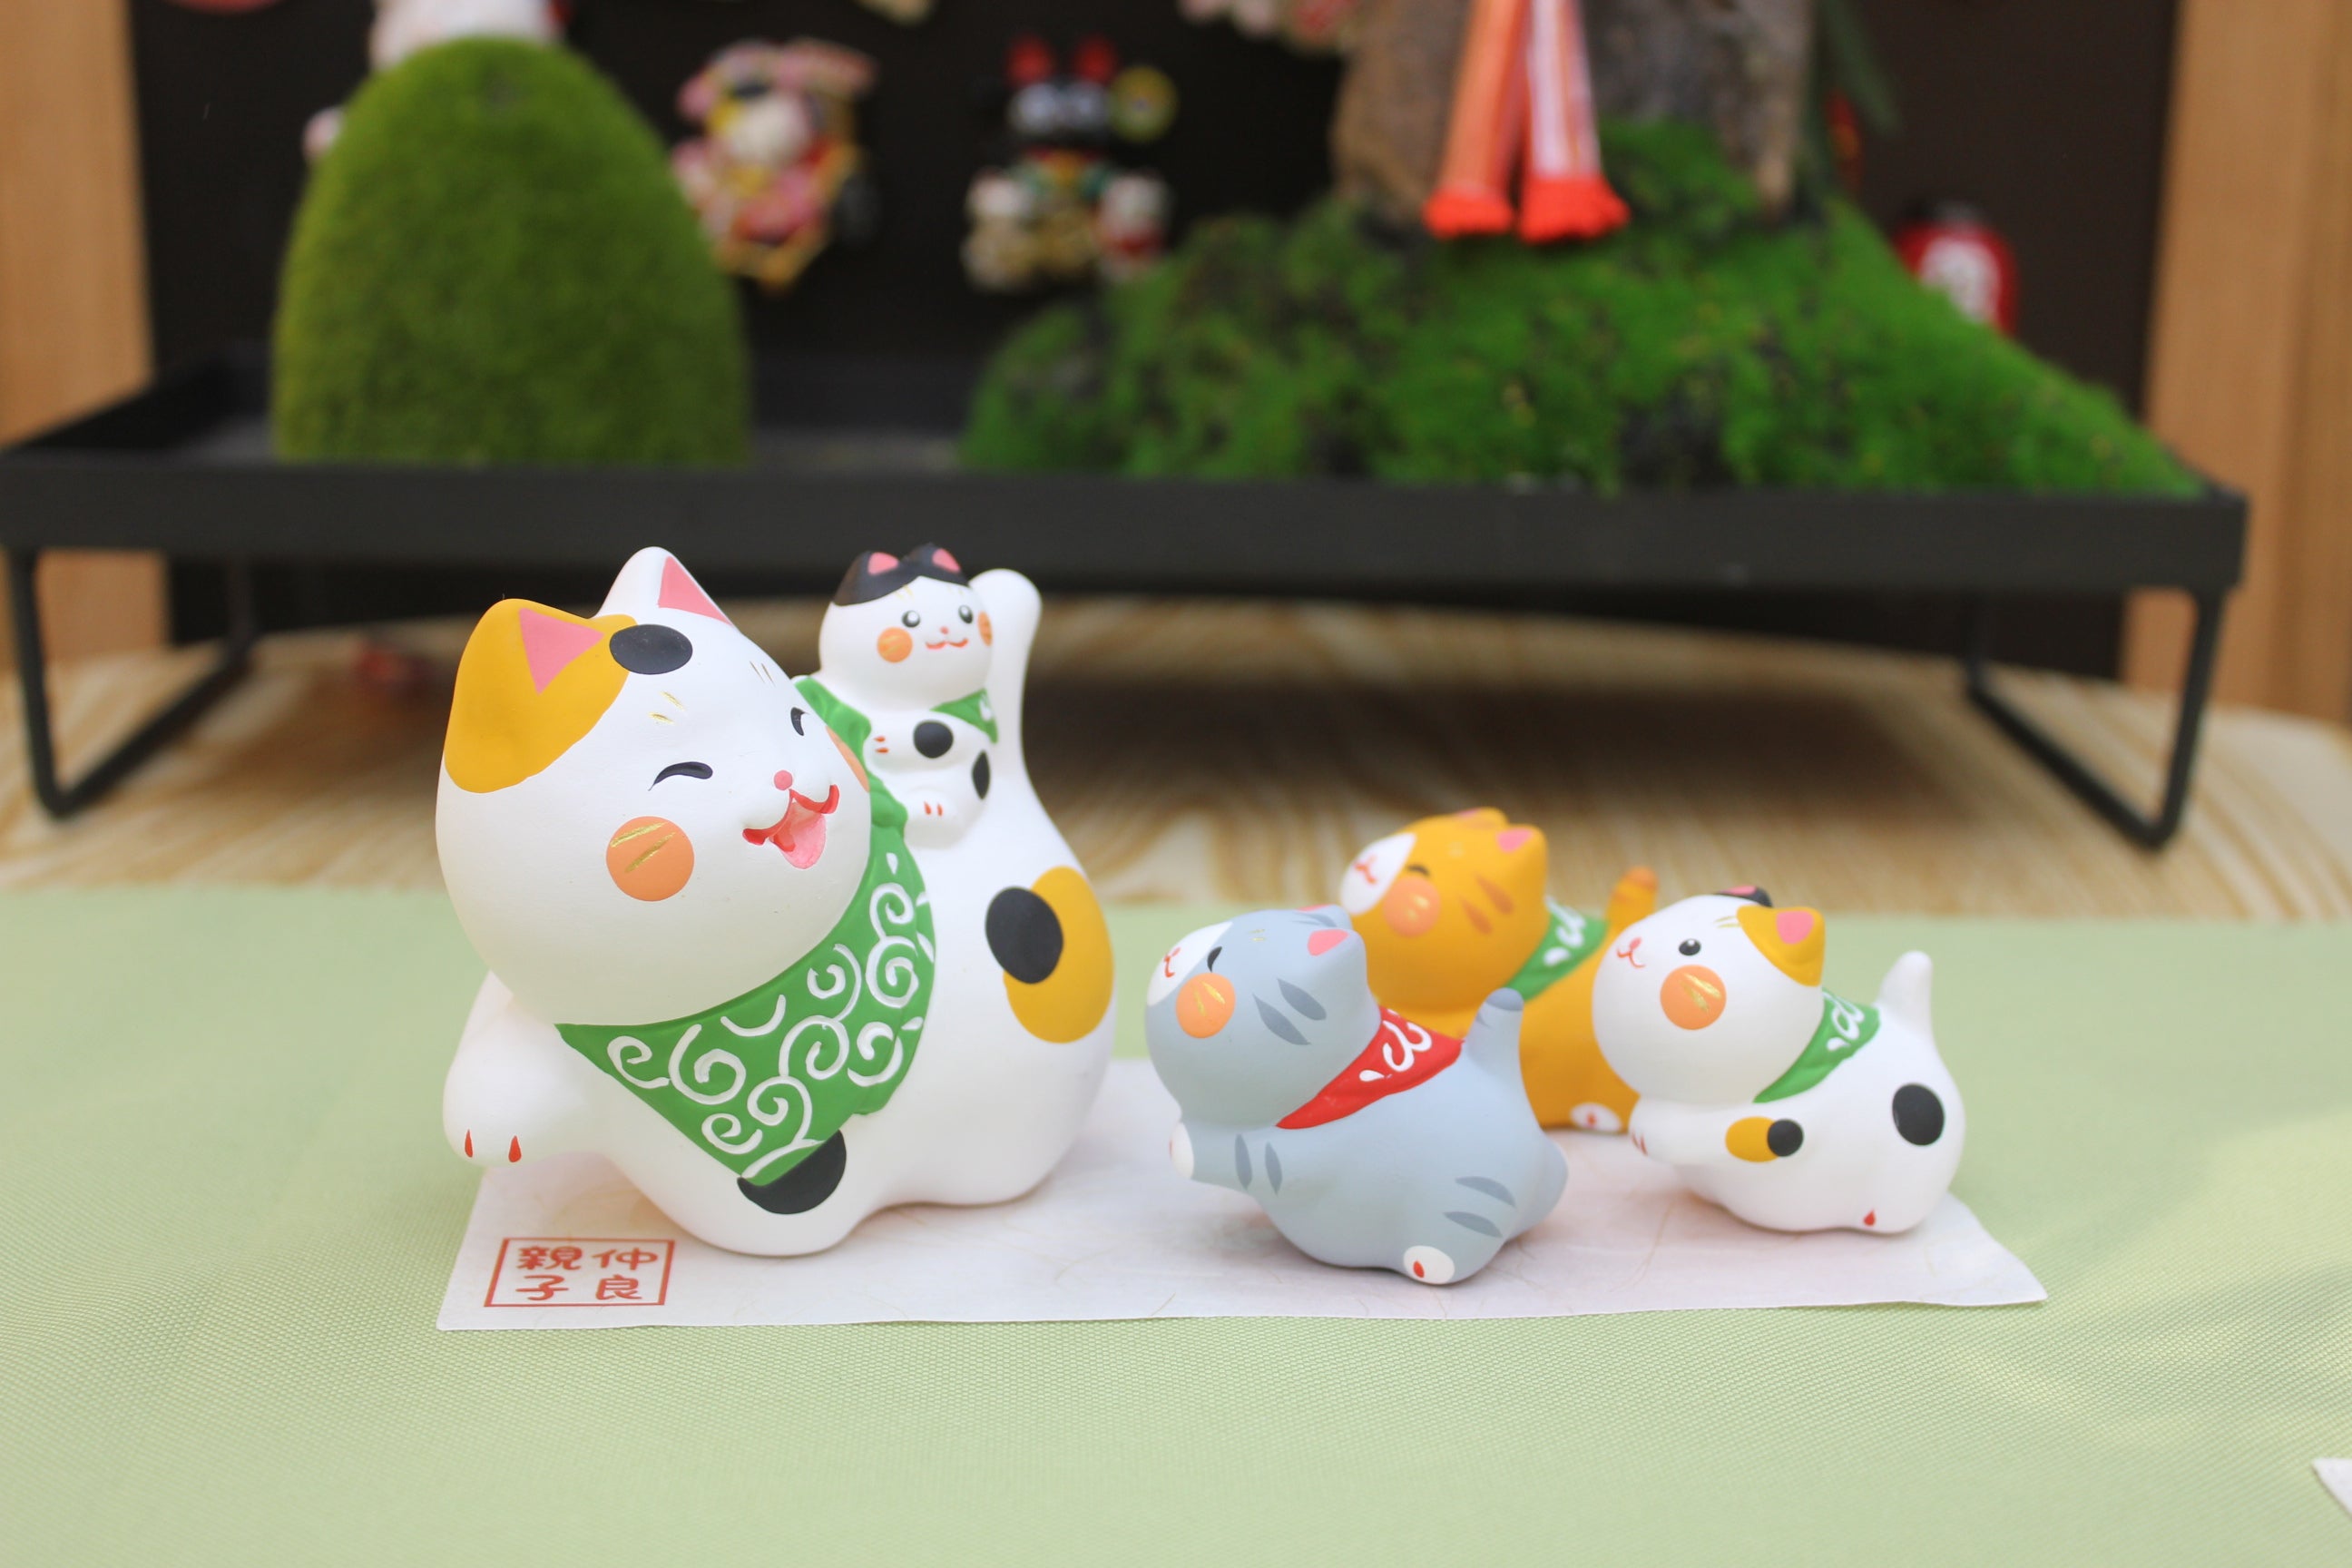 LHZ-372207 Long Hu Zuo Family of Fortune Cat (M)